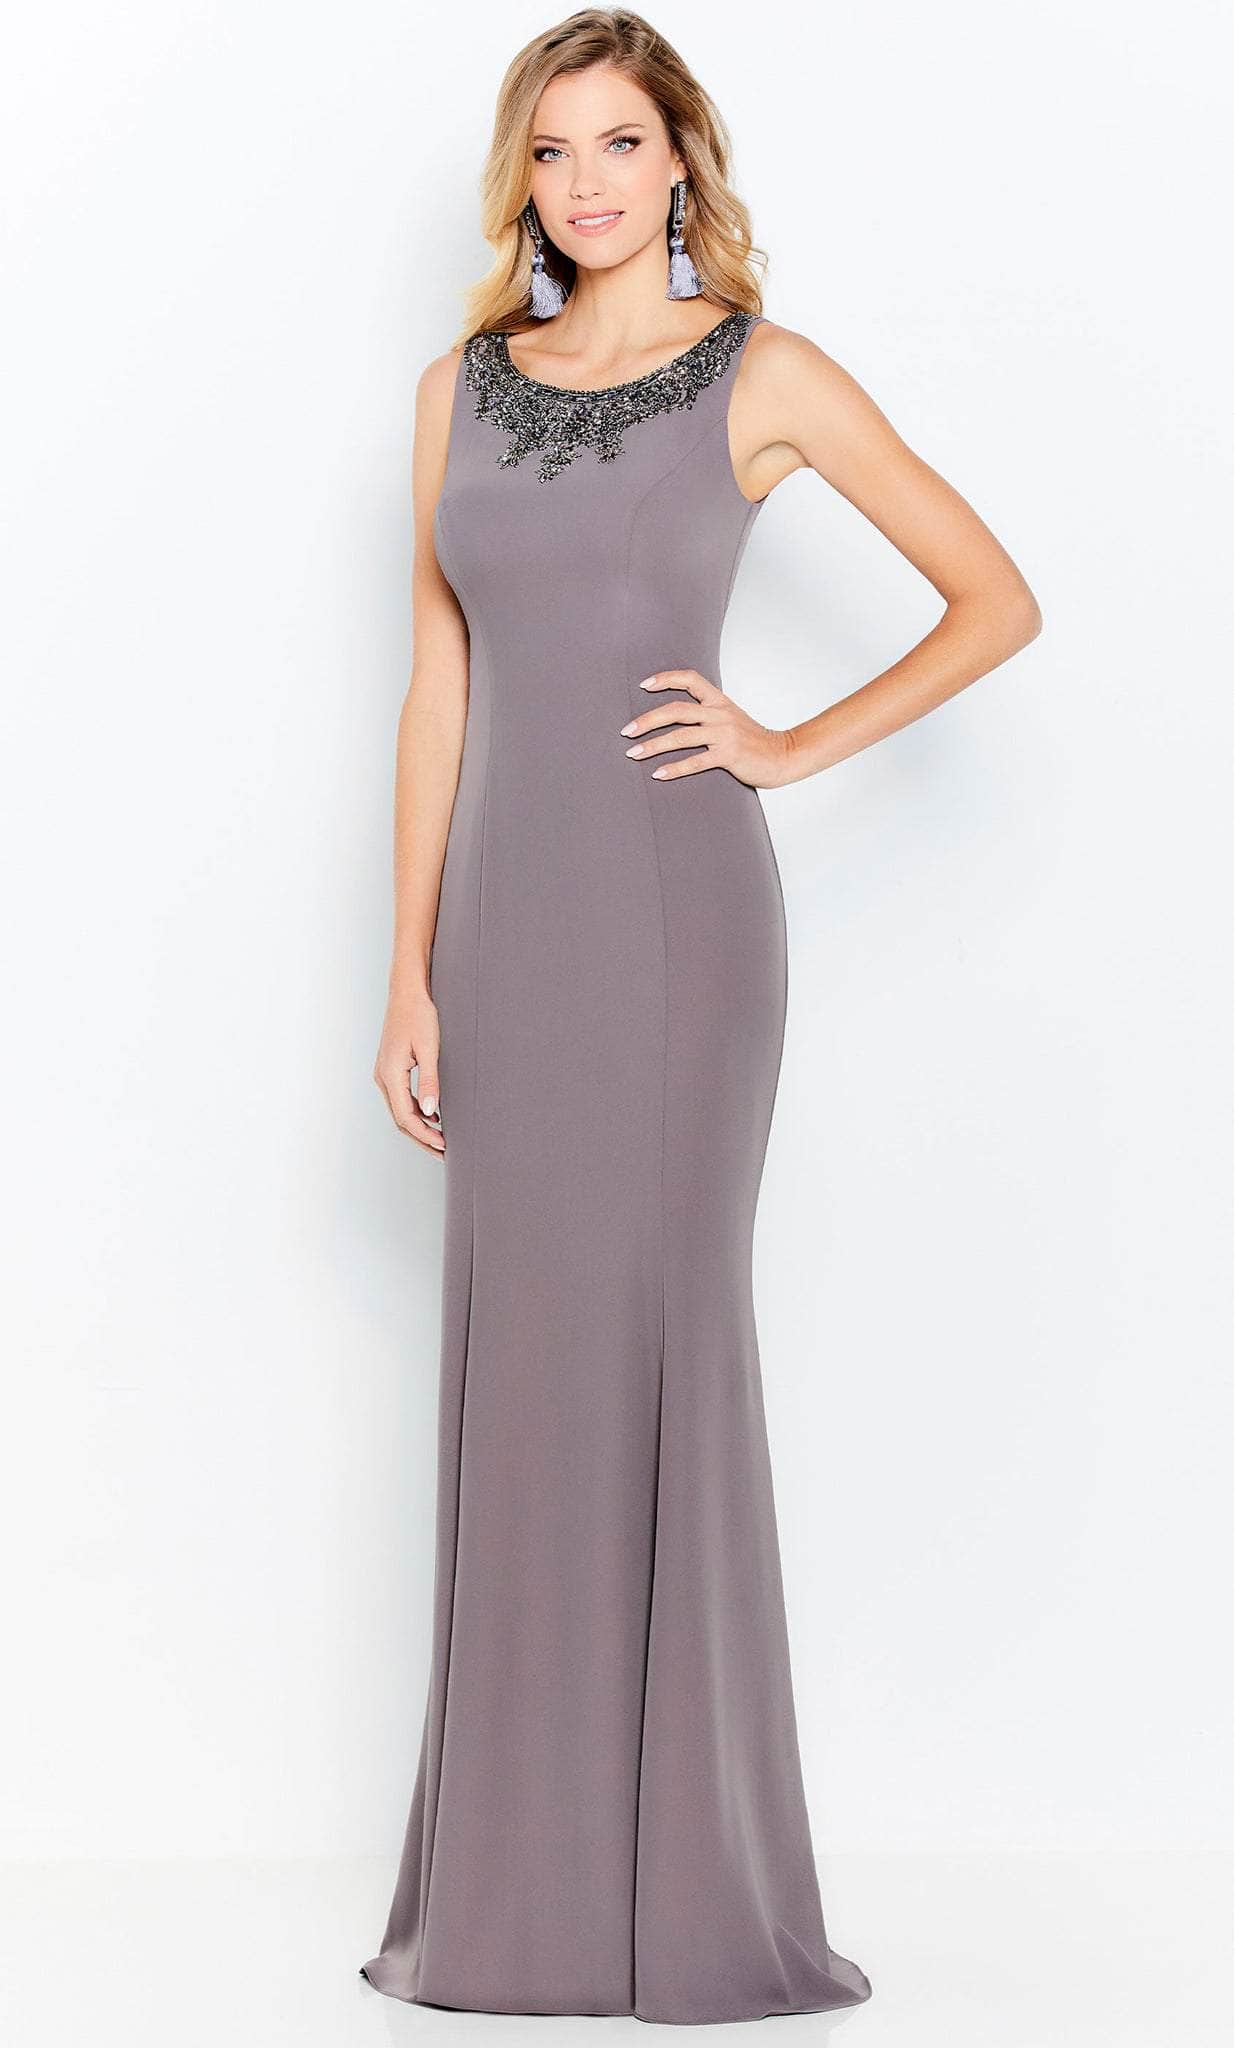 Cameron Blake 120621W - Scoop Neck Gown